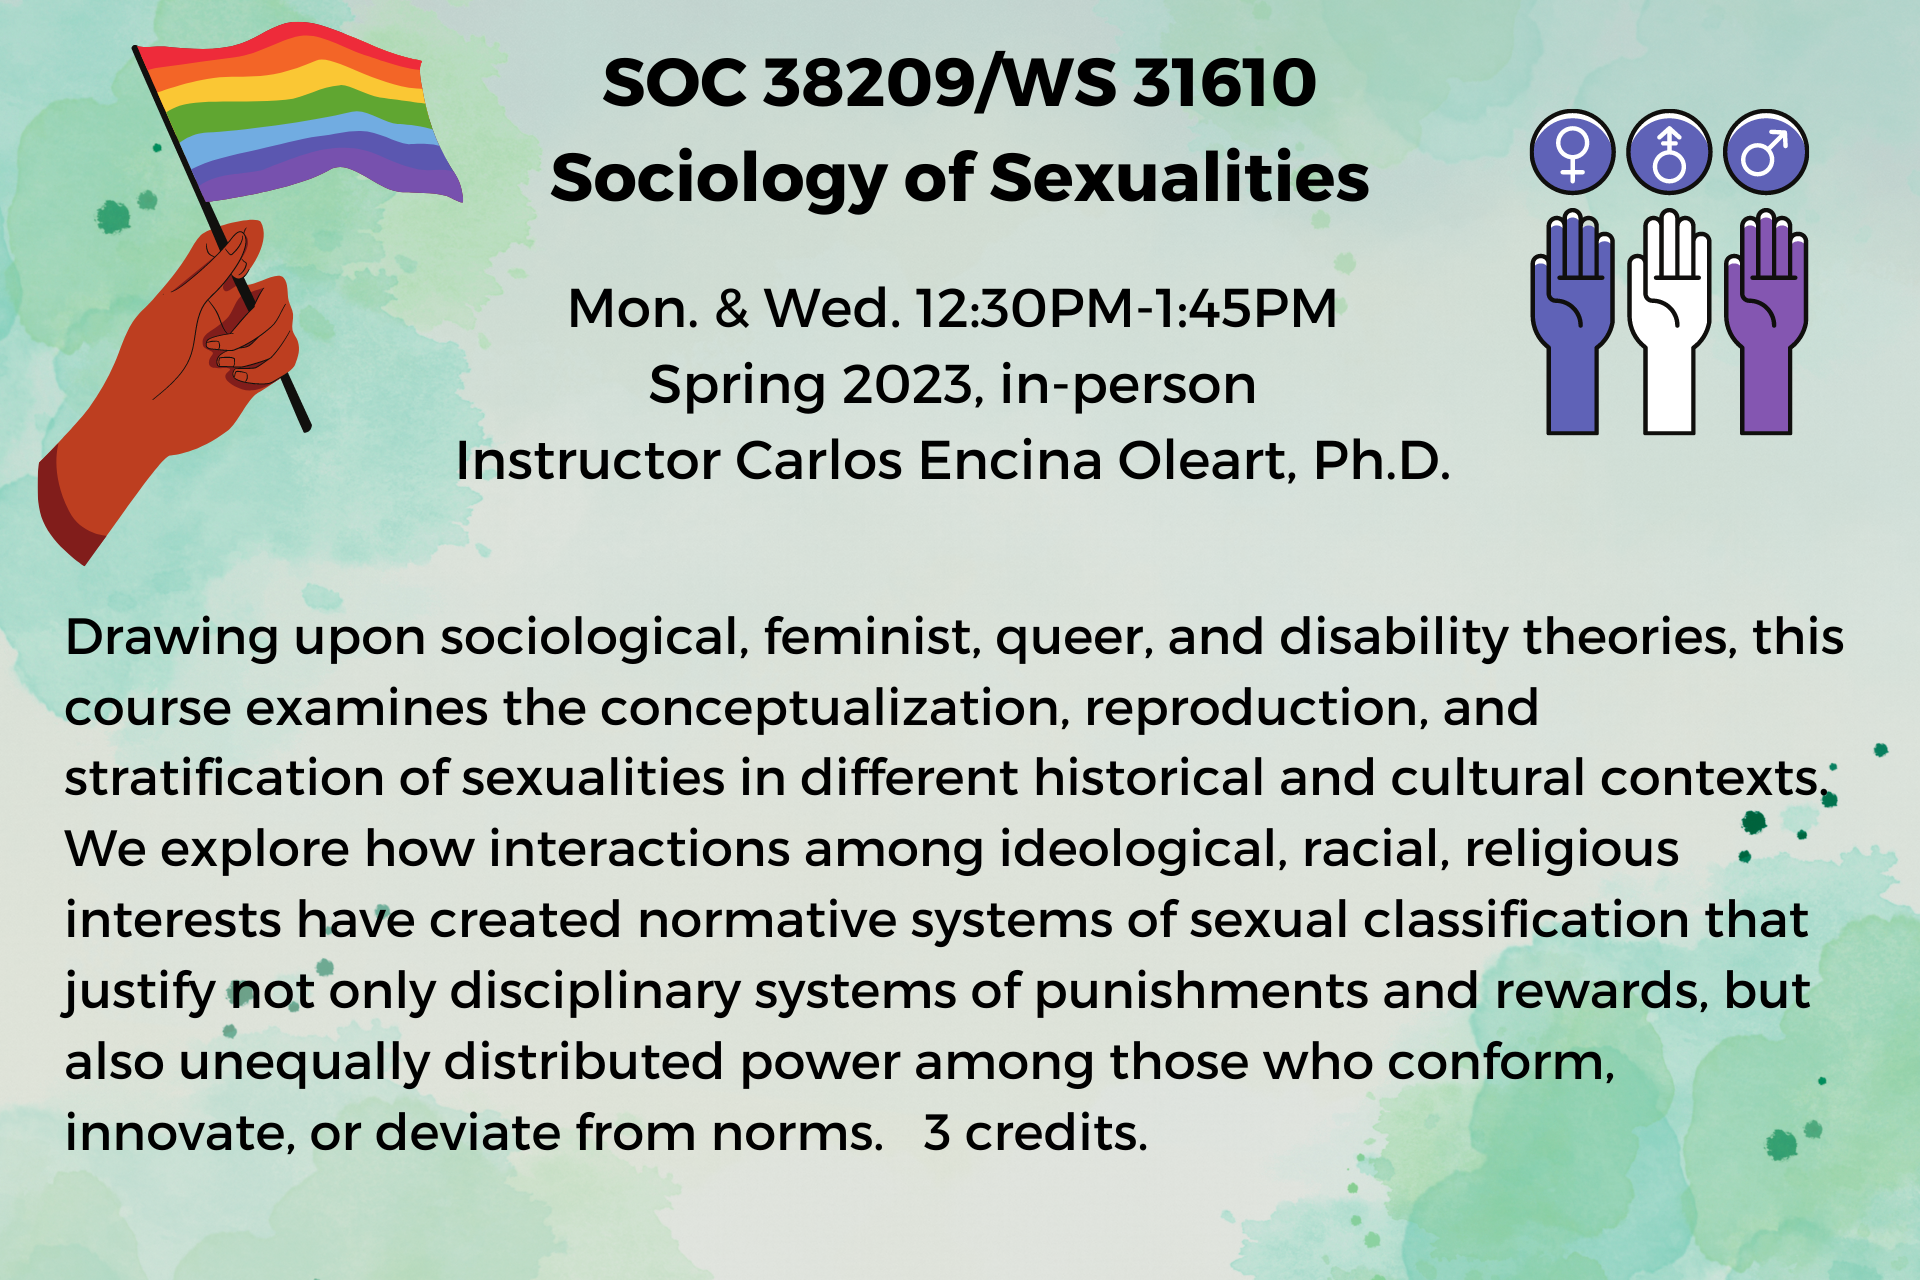 Colin Powell School CCNY Sociology of Sexualities Spring 2023 Course